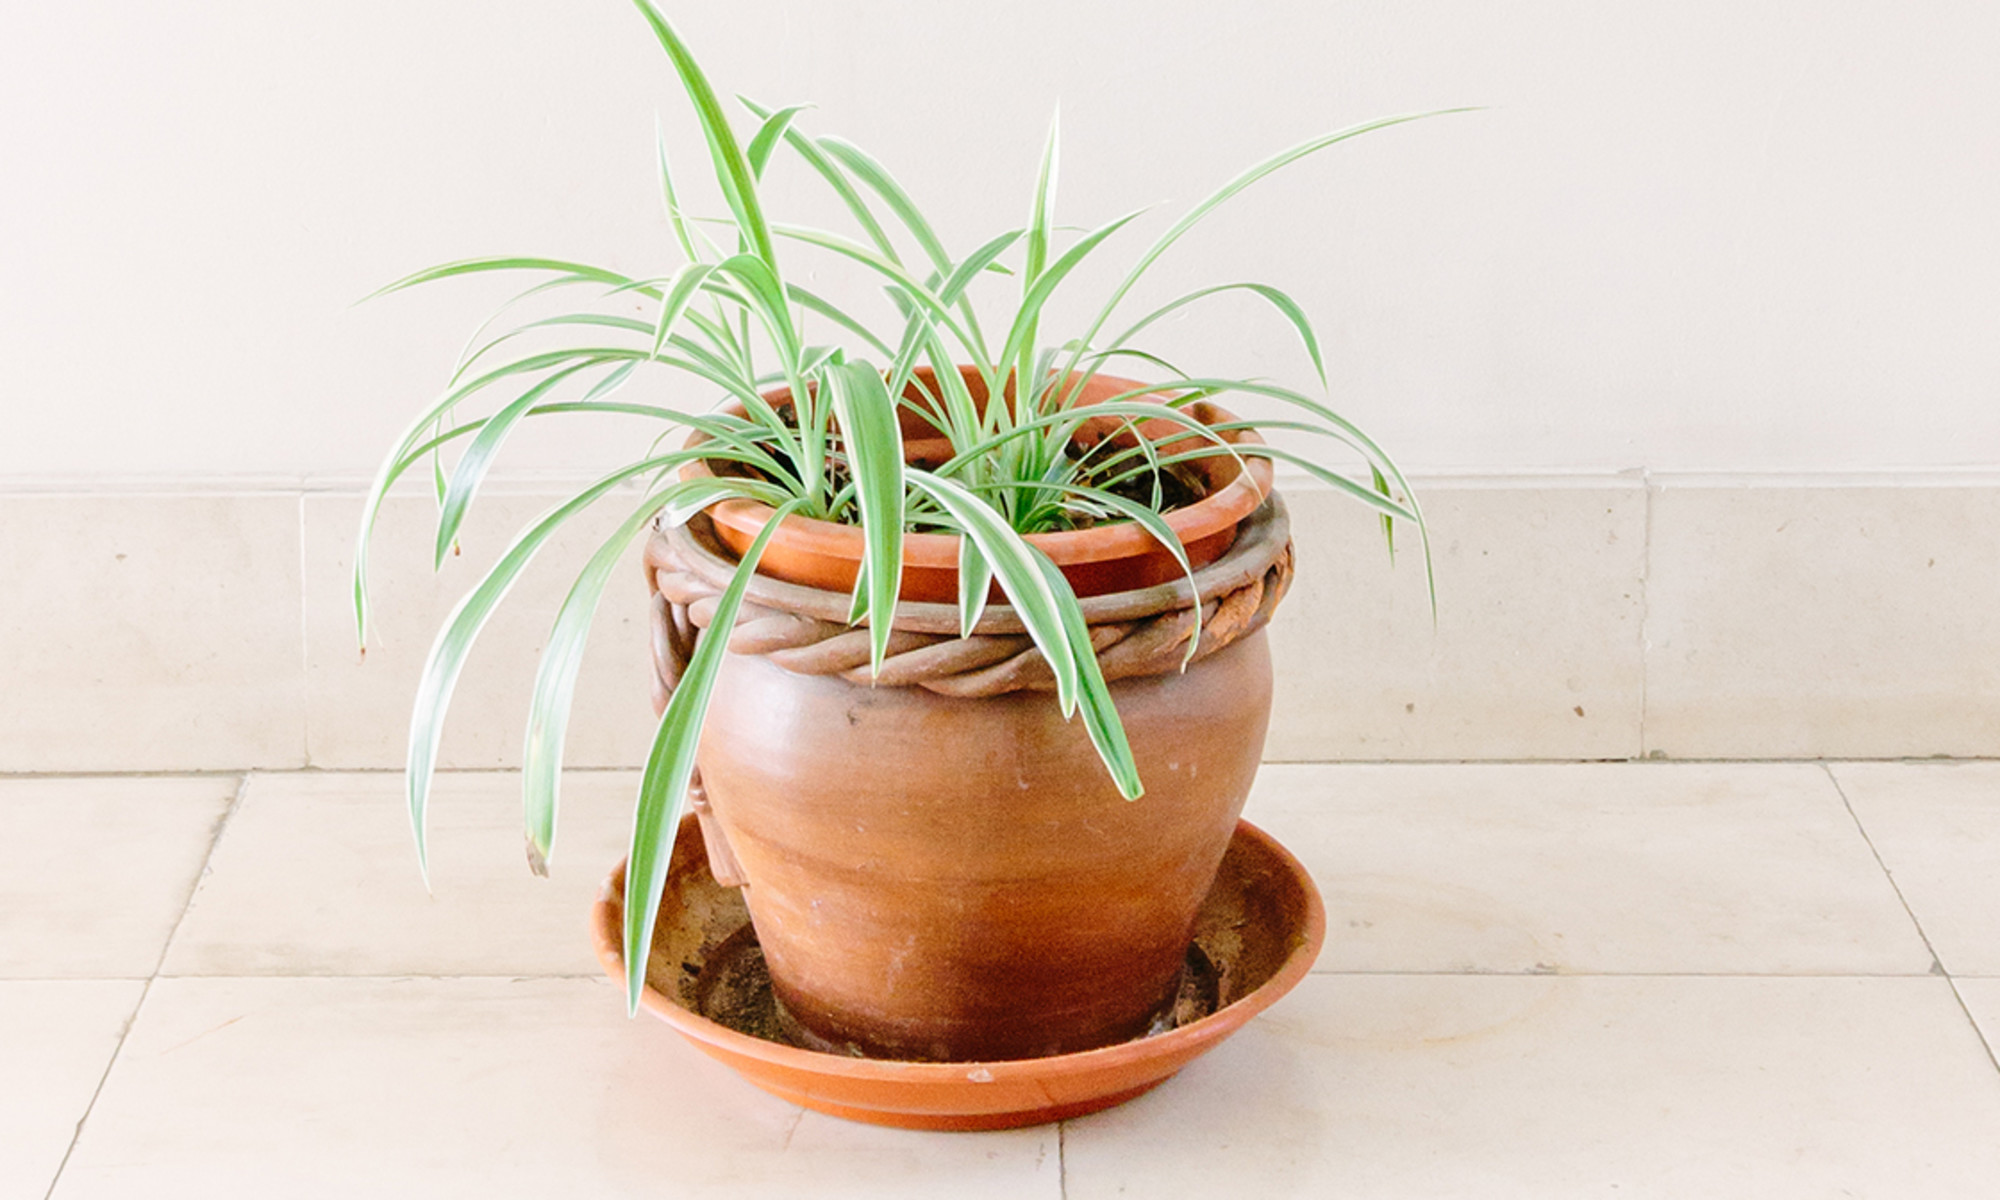 Spider Plants: How to Grow and Care for Spider Plants